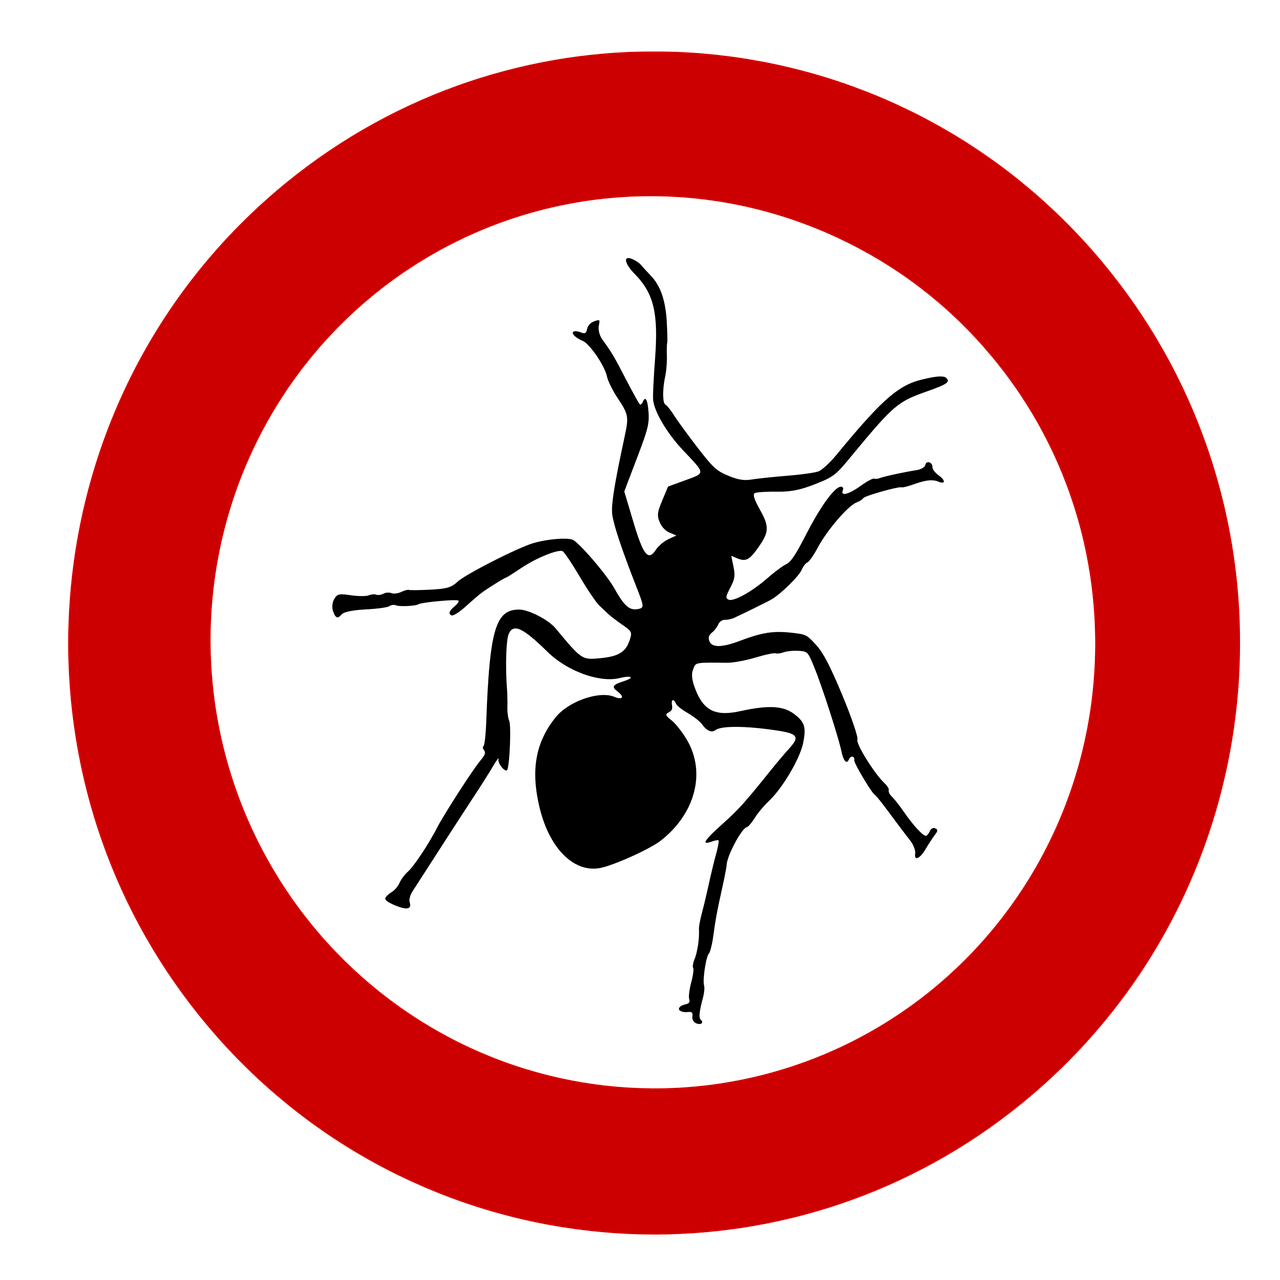 the circle is red with a black background